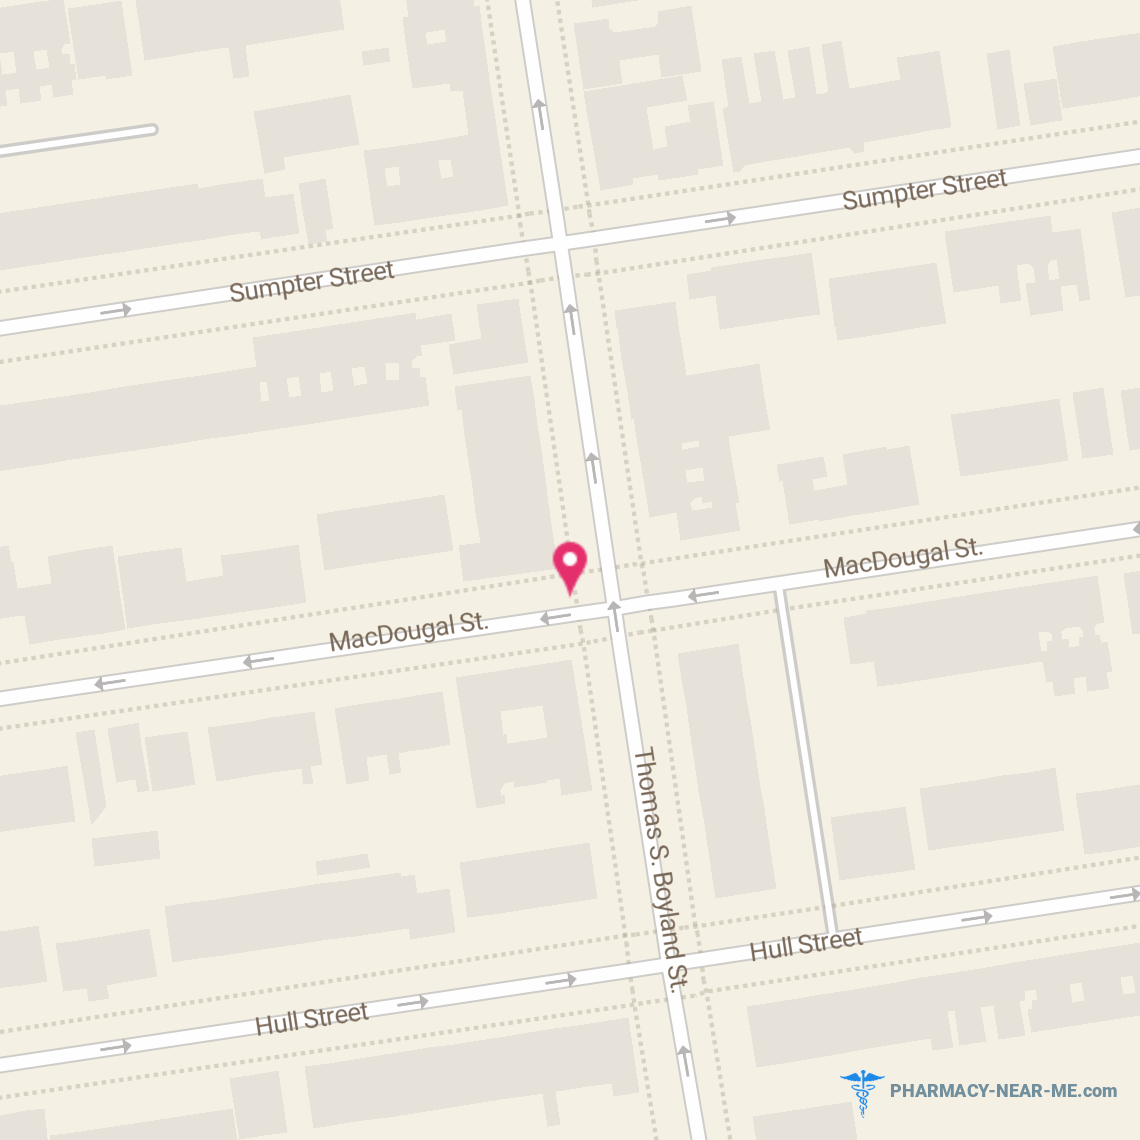 HOPEWELL PHARMACY & SURGICALS, INC. - Pharmacy Hours, Phone, Reviews & Information: 181 Macdougal Street, Brooklyn, New York 11233, United States